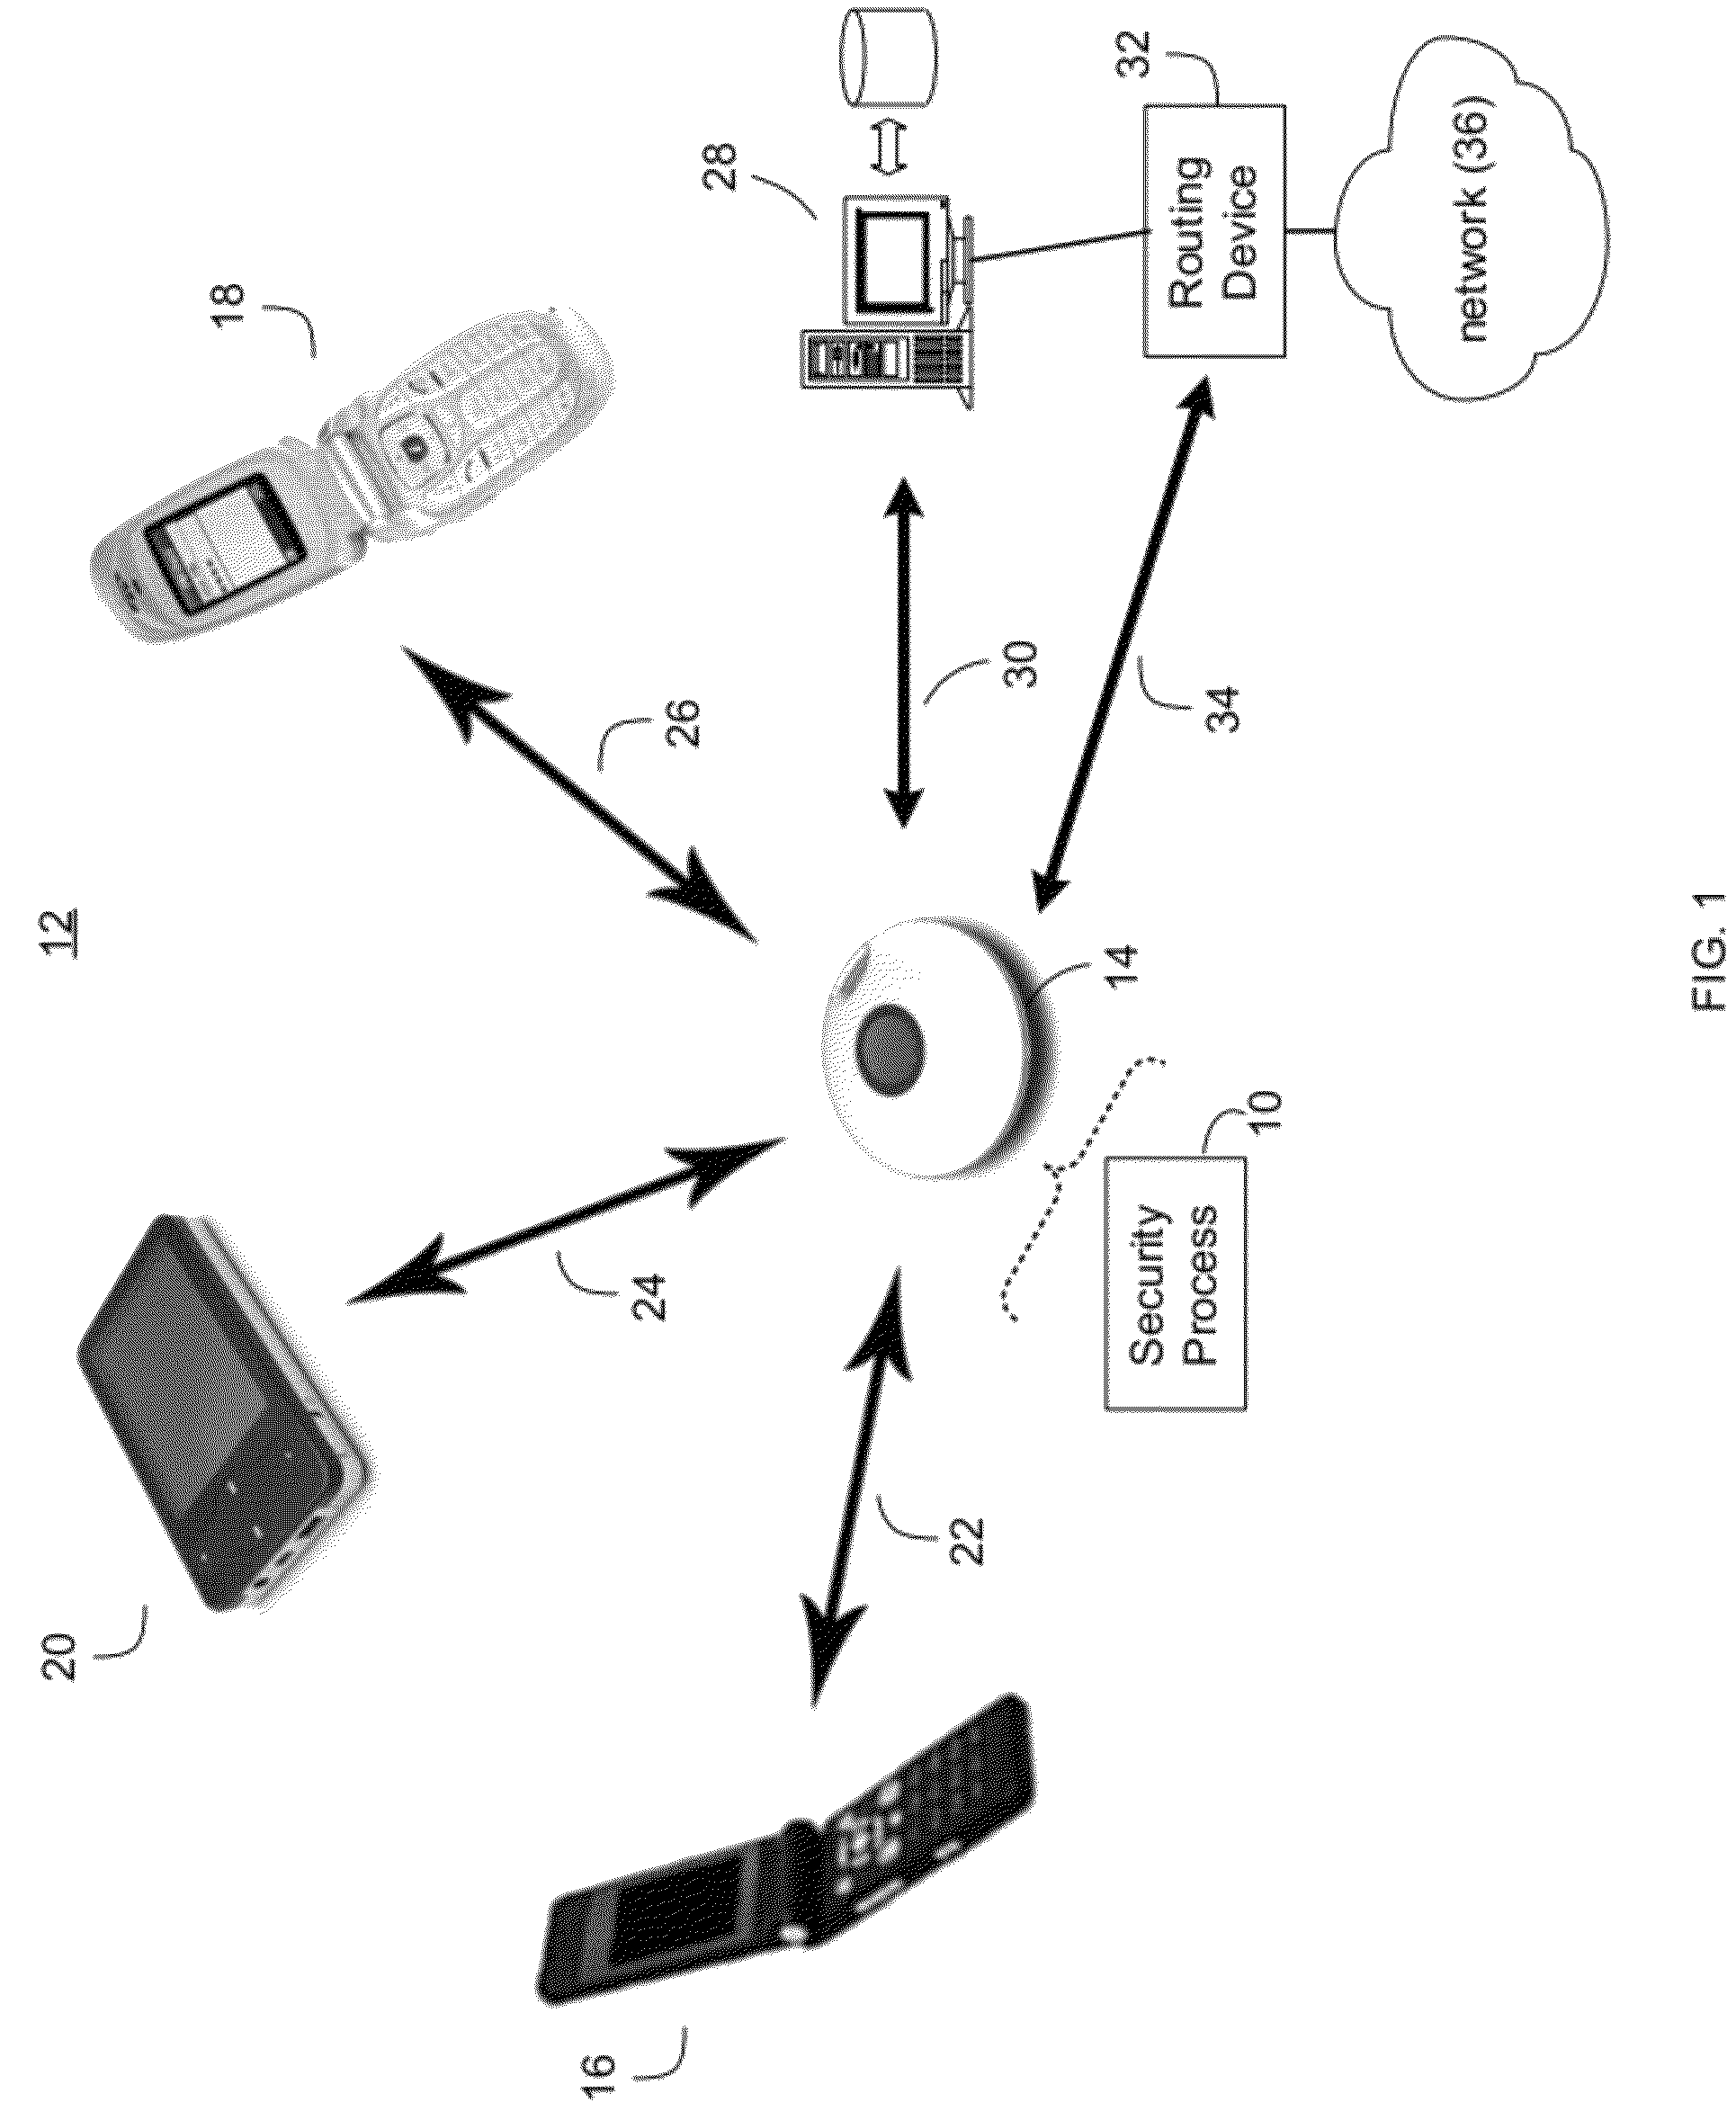 Wireless security device and method to place emergency calls